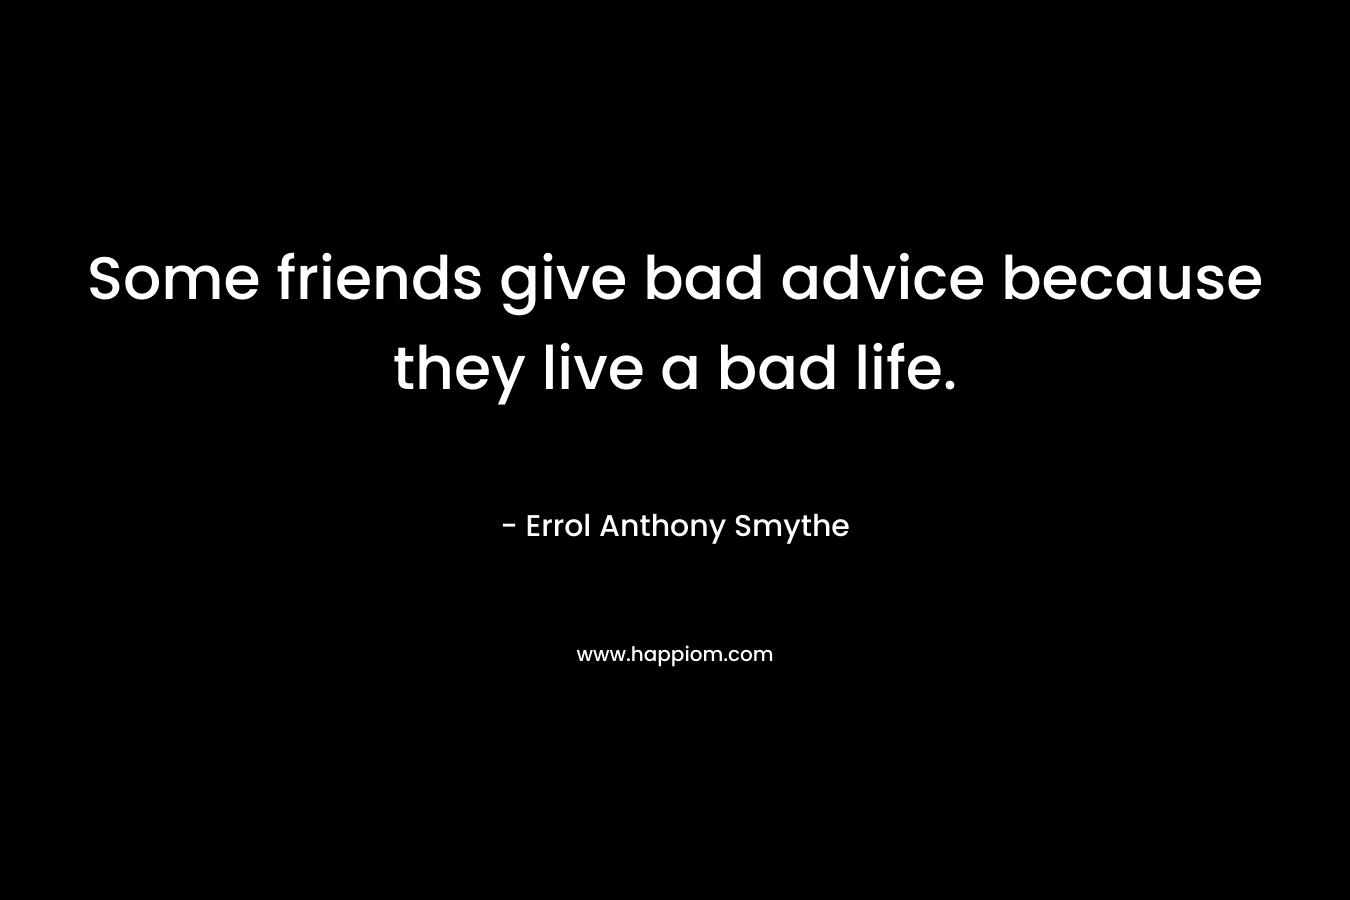 Some friends give bad advice because they live a bad life. – Errol Anthony Smythe